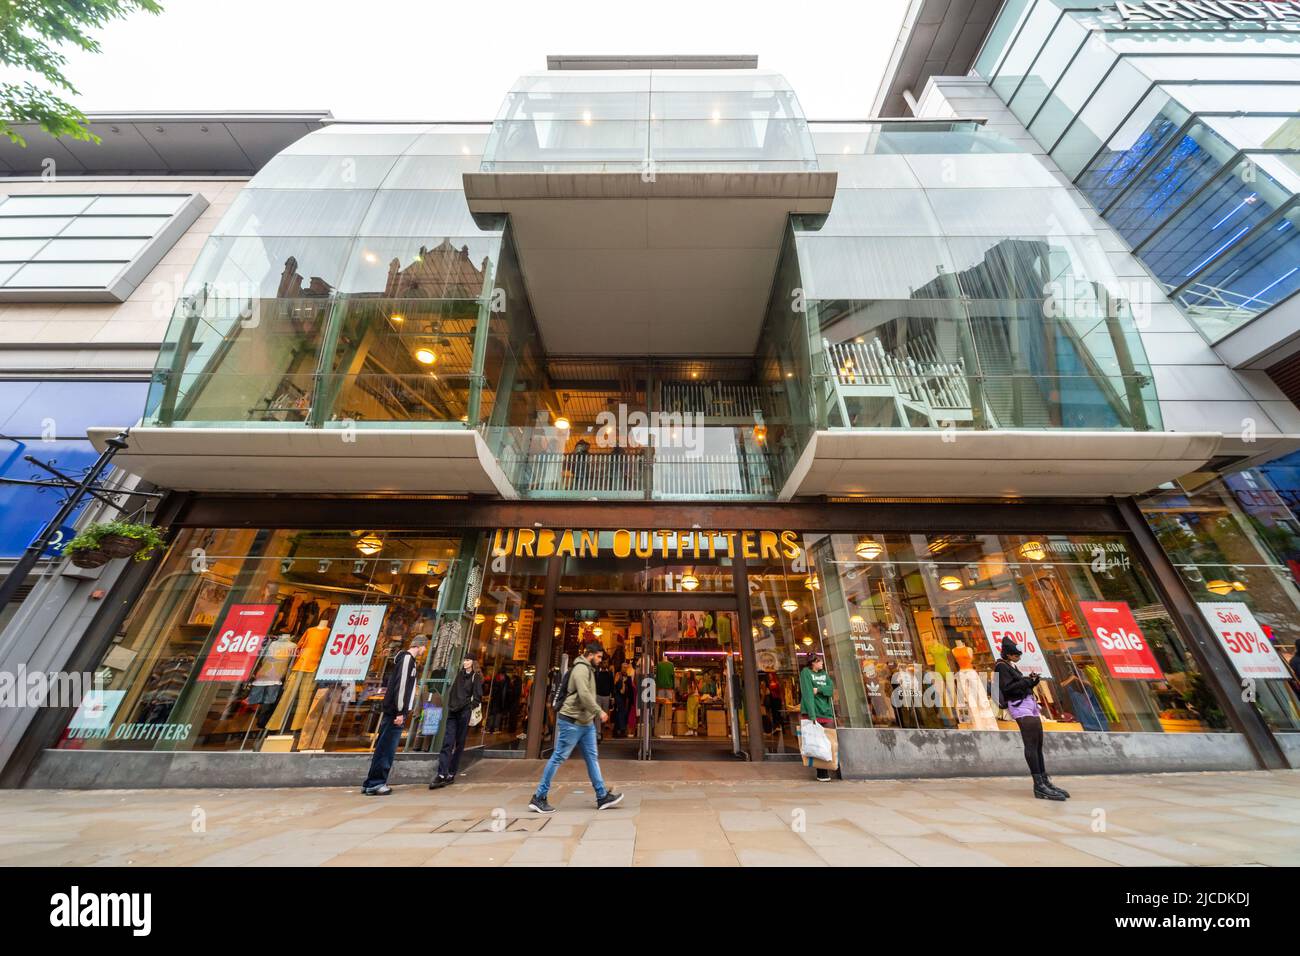 Urban Outfitters Market Street Store, Manchester, UK. Chain store selling  clothing, accessories and items for the home. England, UK Stock Photo -  Alamy